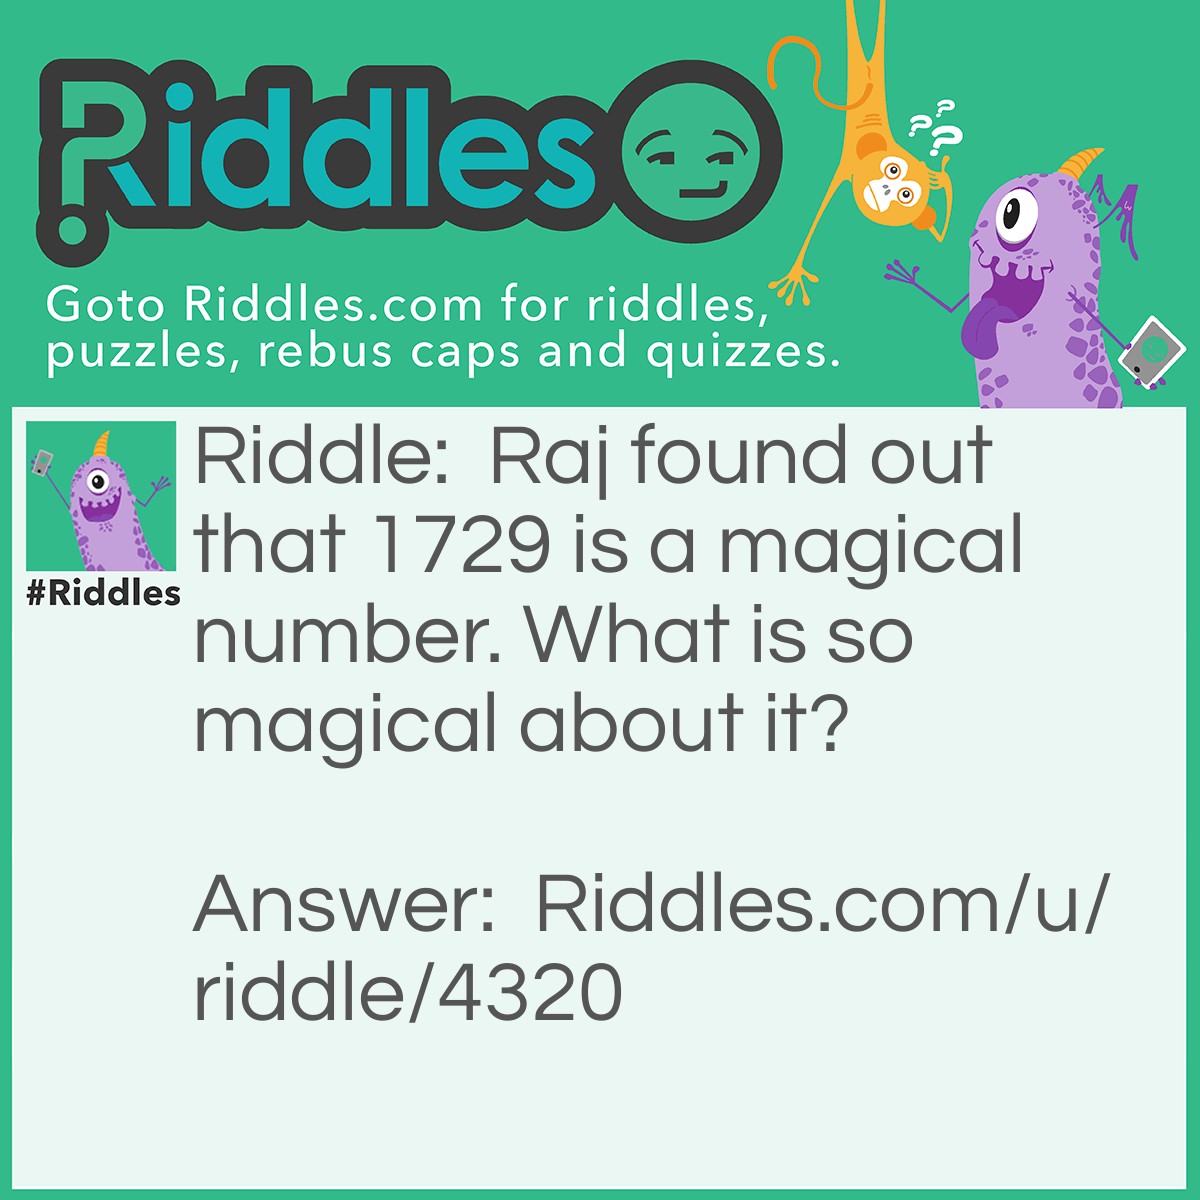 Riddle: Raj found out that 1729 is a magical number. What is so magical about it? Answer: They can be expressed as the sum of the cubes of two different sets of numbers. 10^3 + 9^3 = 1729, and 12^3 + 1^3 = 1729.